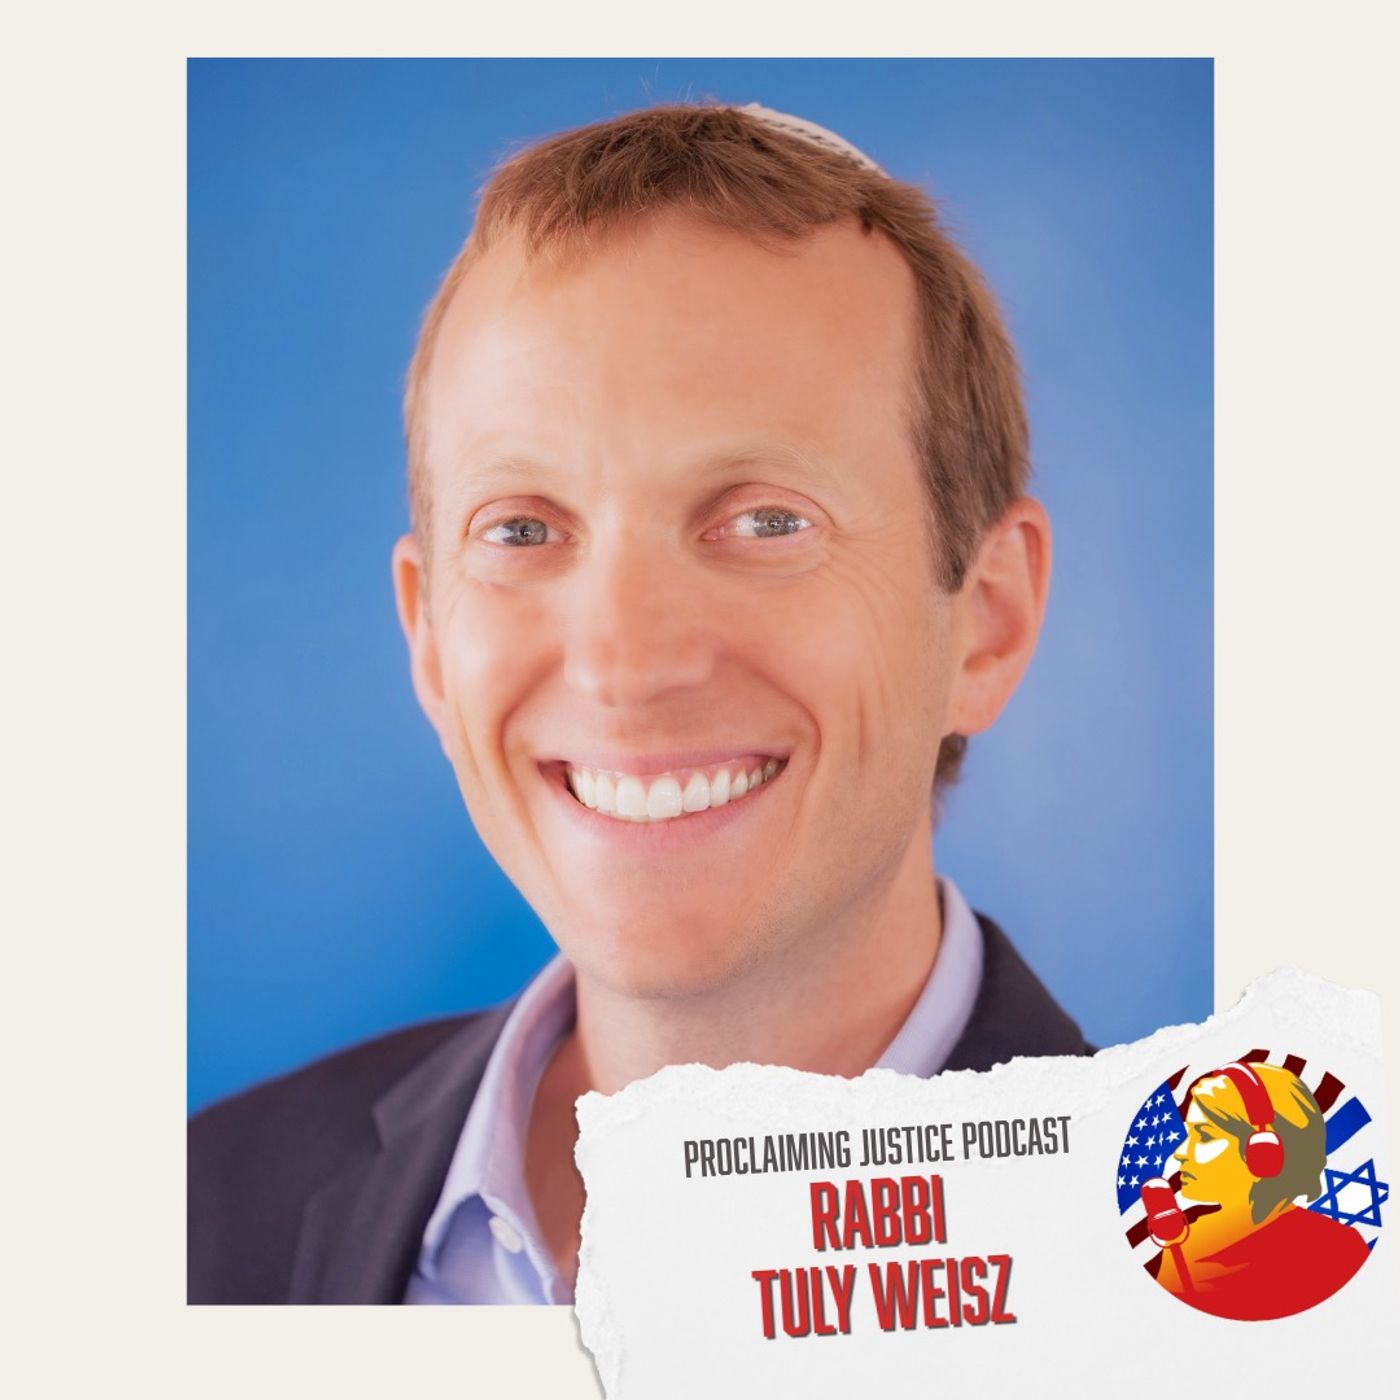 Rabbi Tuly Weisz with Israel 365 provides necessary insight on October 7th!